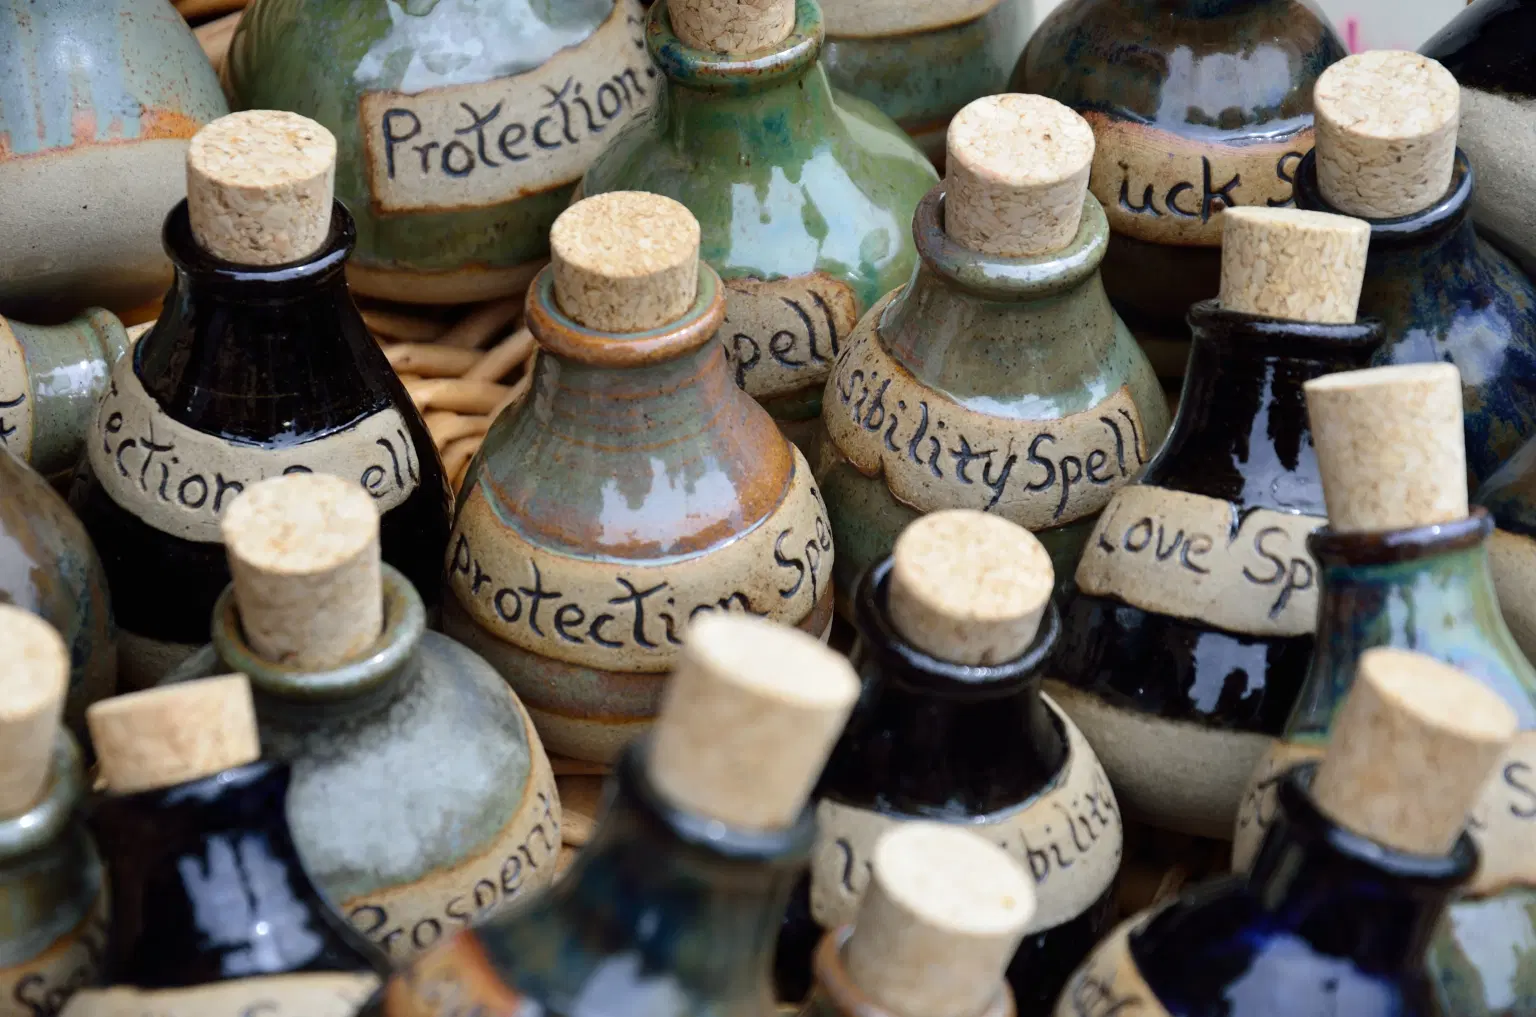 A variety of potions